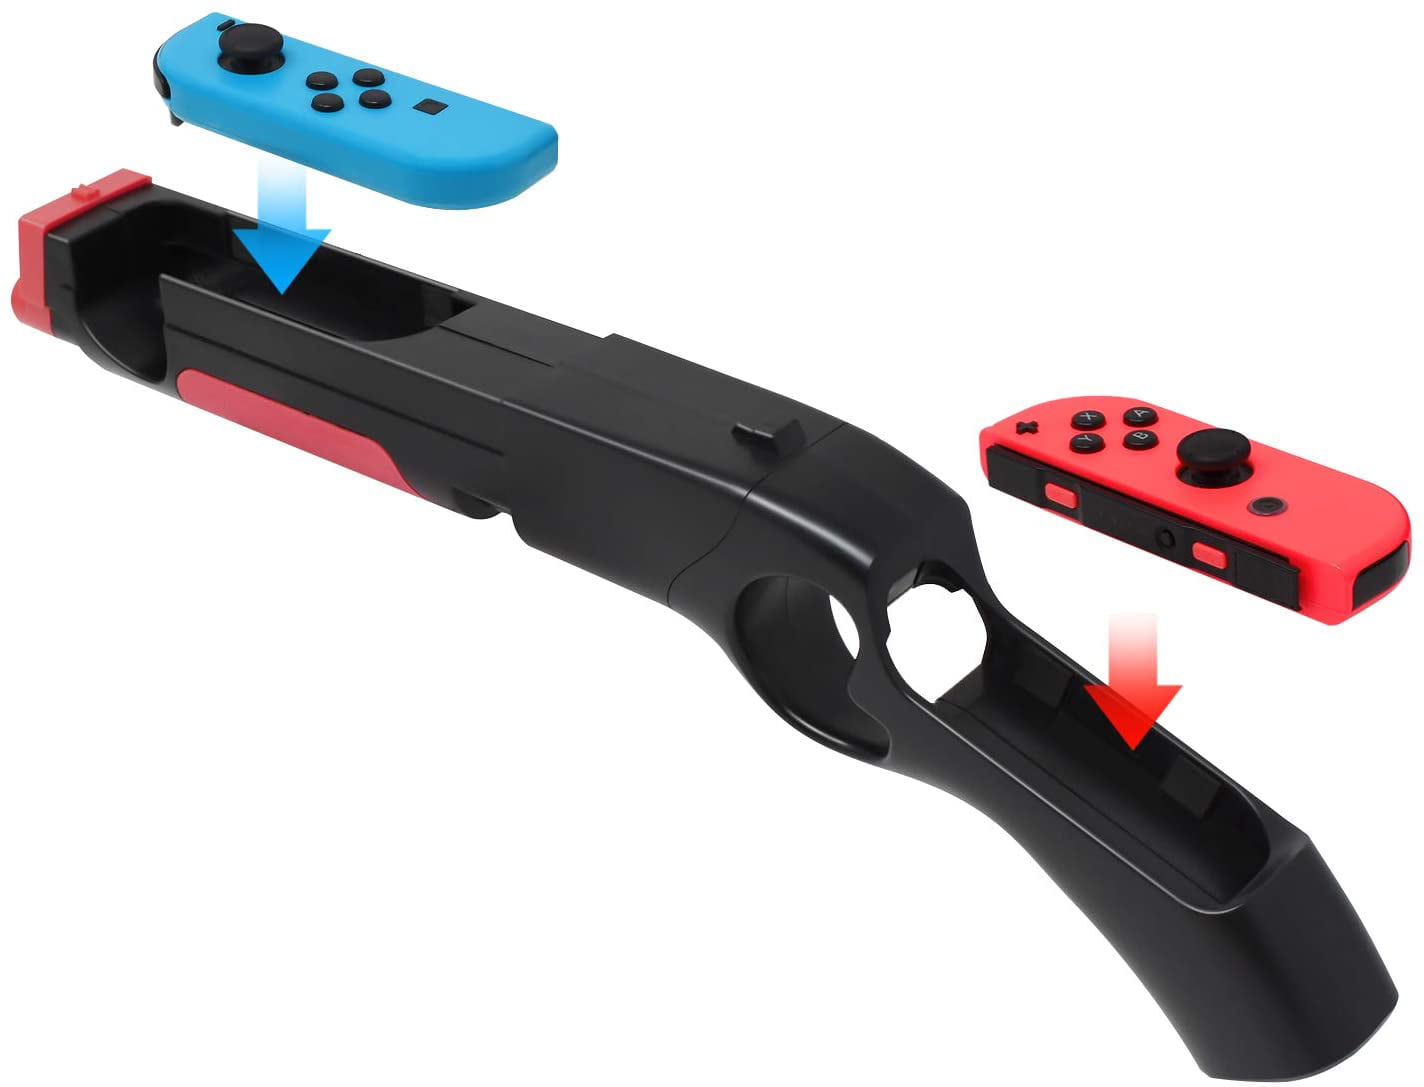 får form Spis aftensmad Game Gun Controller for Switch Joy Cons Hand Grips Shooting Games  Wolfenstein 2: The New Colossus, Big Buck Hunter Arcade - for Nintendo  Switch and Other Shooting Games - Walmart.com